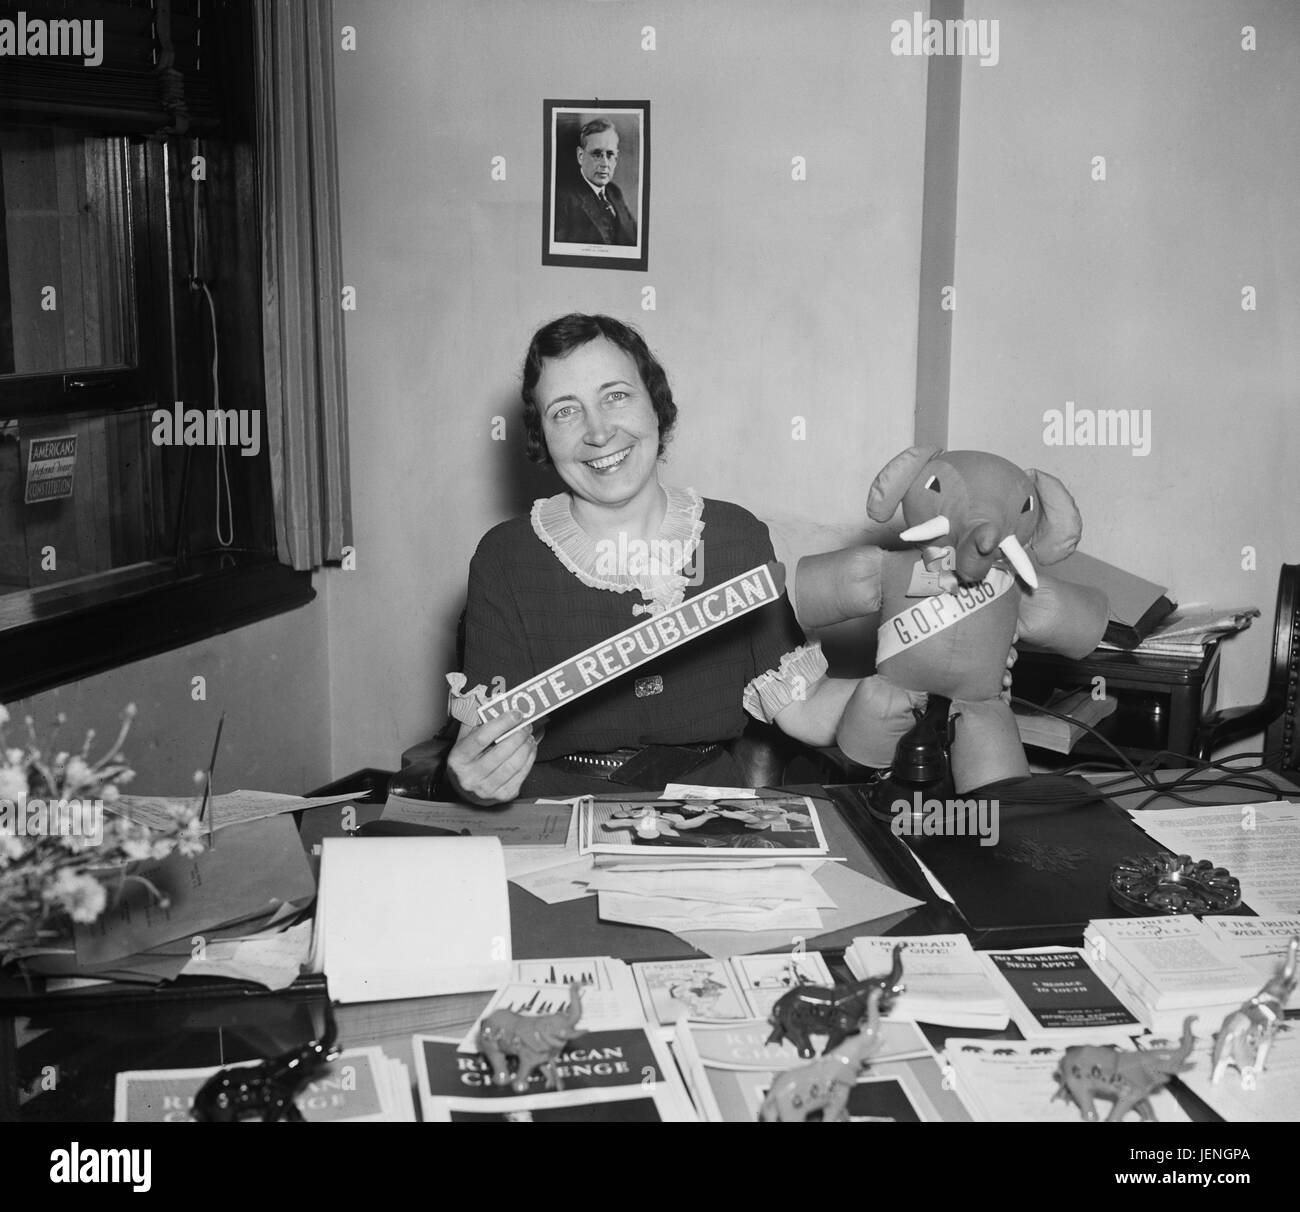 Woman at Office Desk Holding "Vote Republican" Sign and GOP Elephant, Harris and Ewing, 1936 Stock Photo